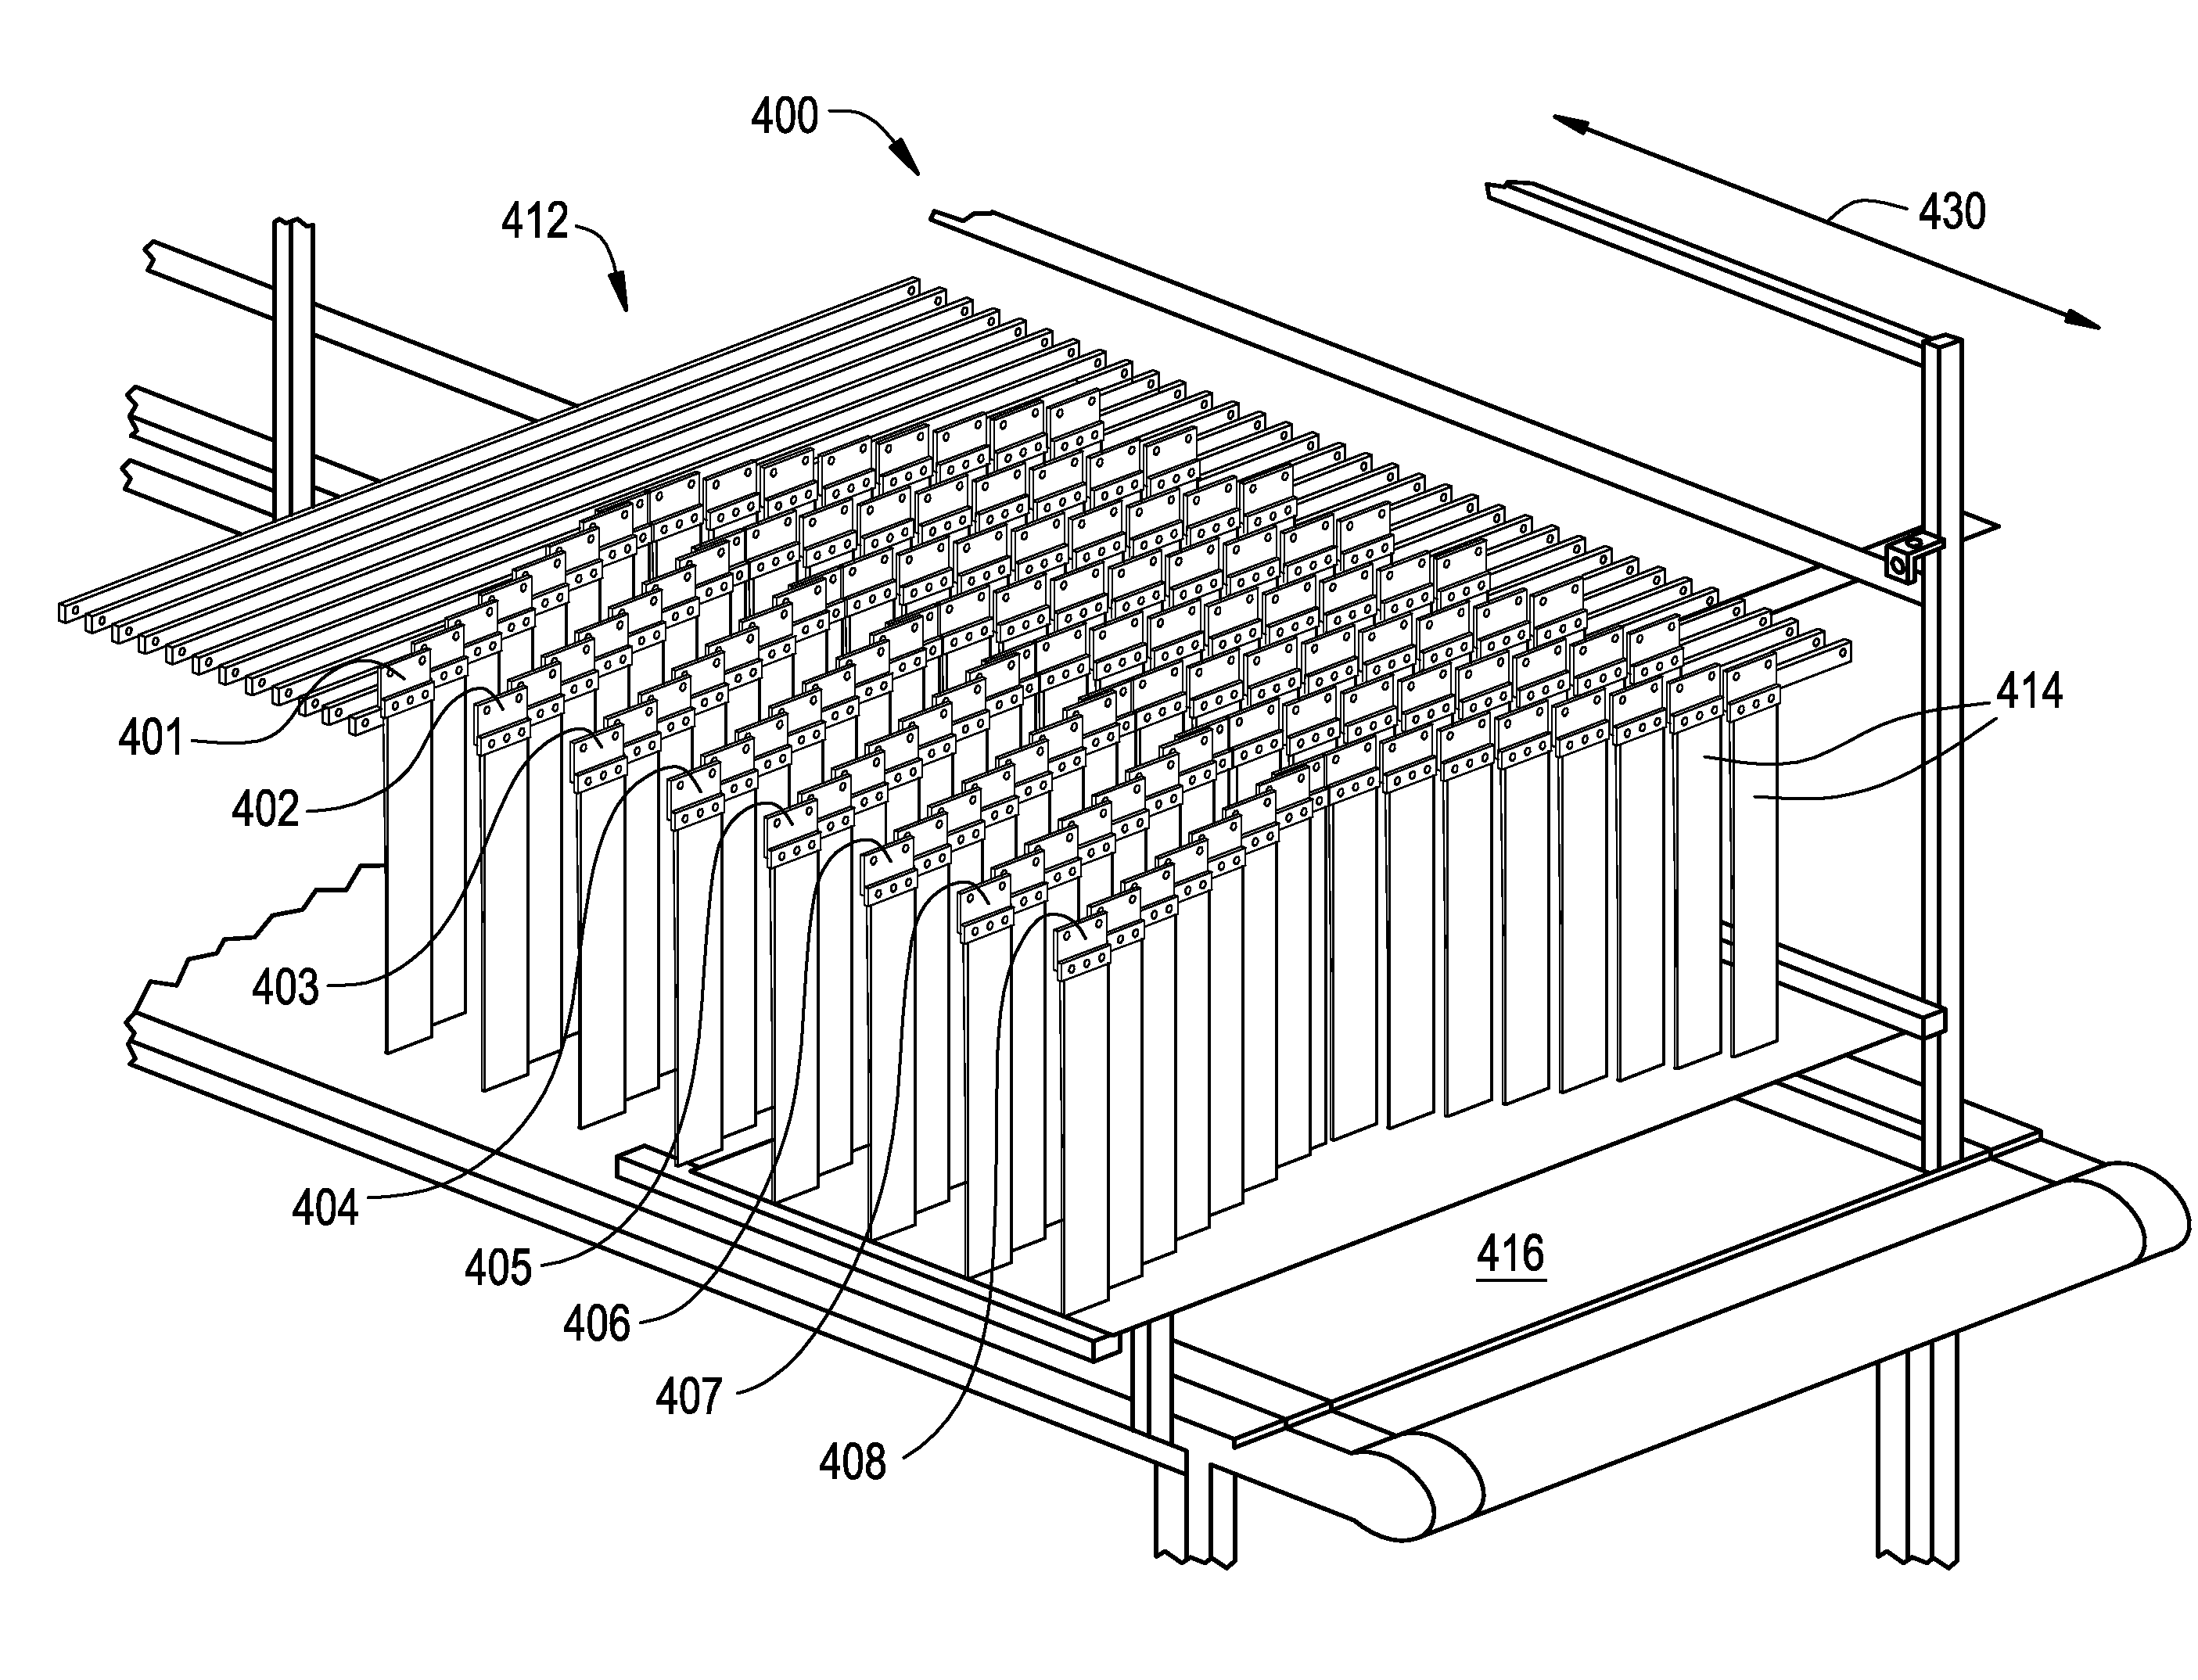 Method and apparatus for providing radiation shielding for non-invasive inspection systems